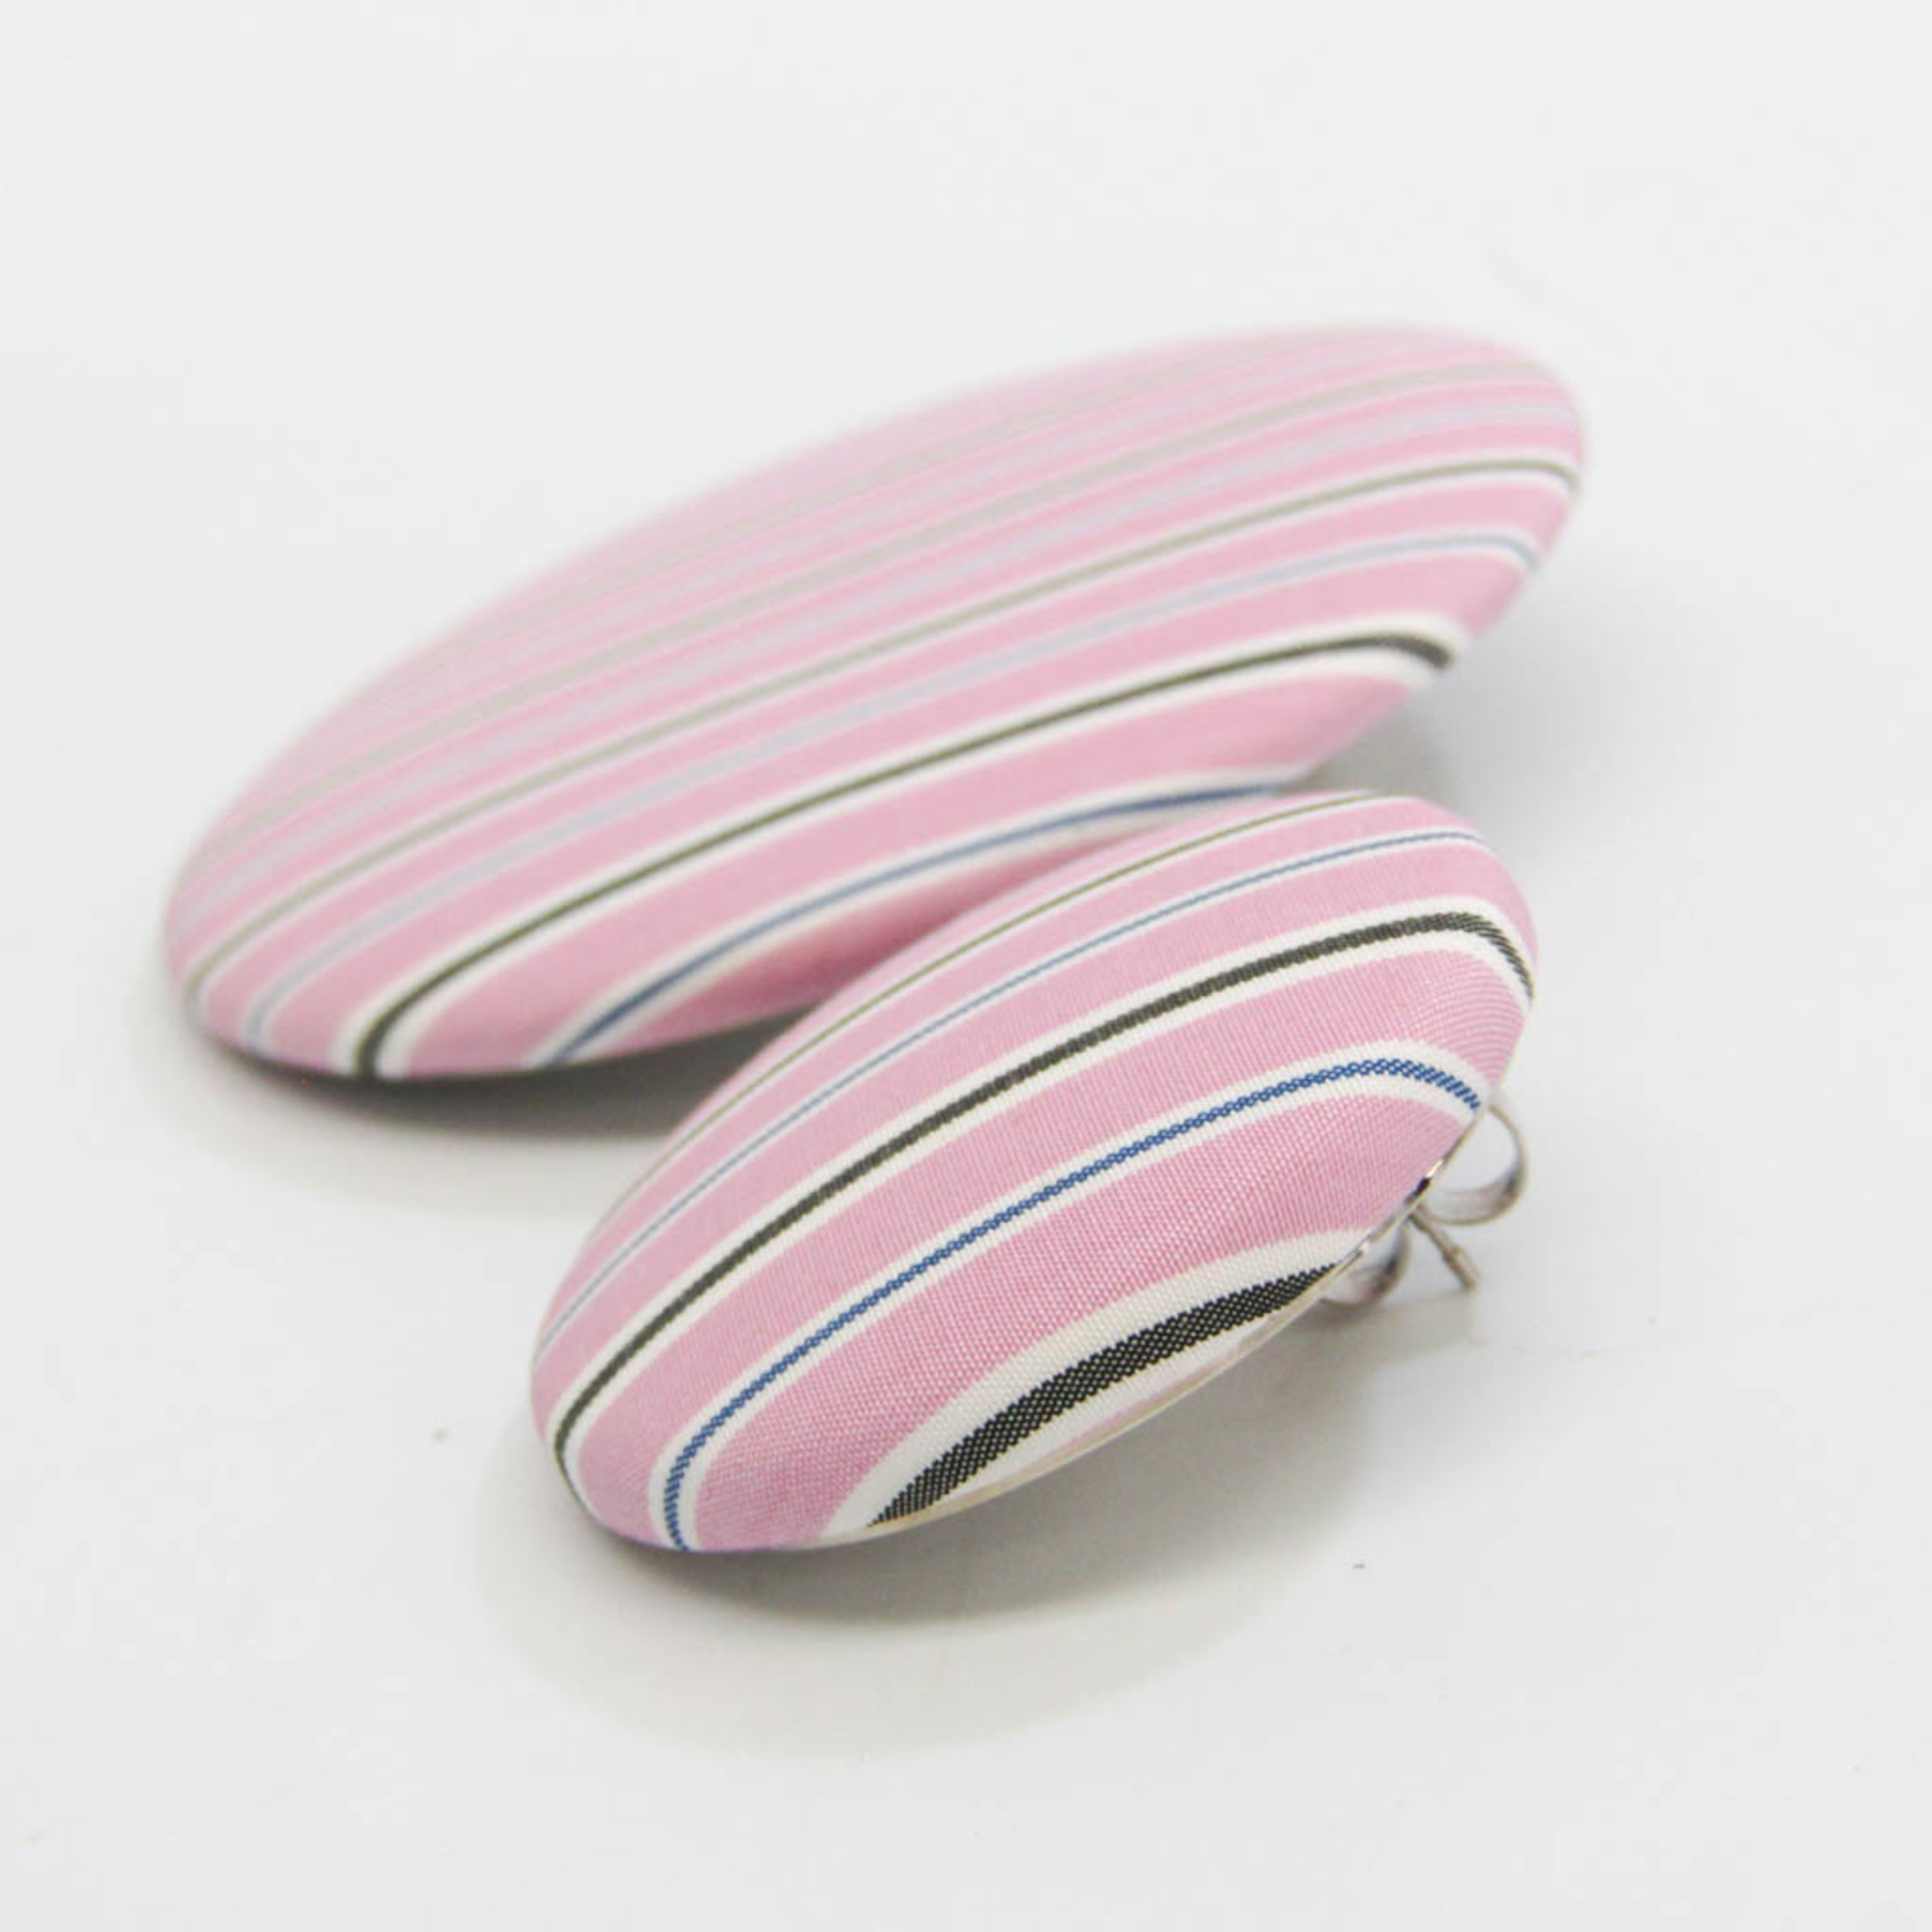 Balenciaga 3 Types Set Cotton Striped Pattern Canvas,Metal Ball Stud Earrings Multi-color,Pink,Silver